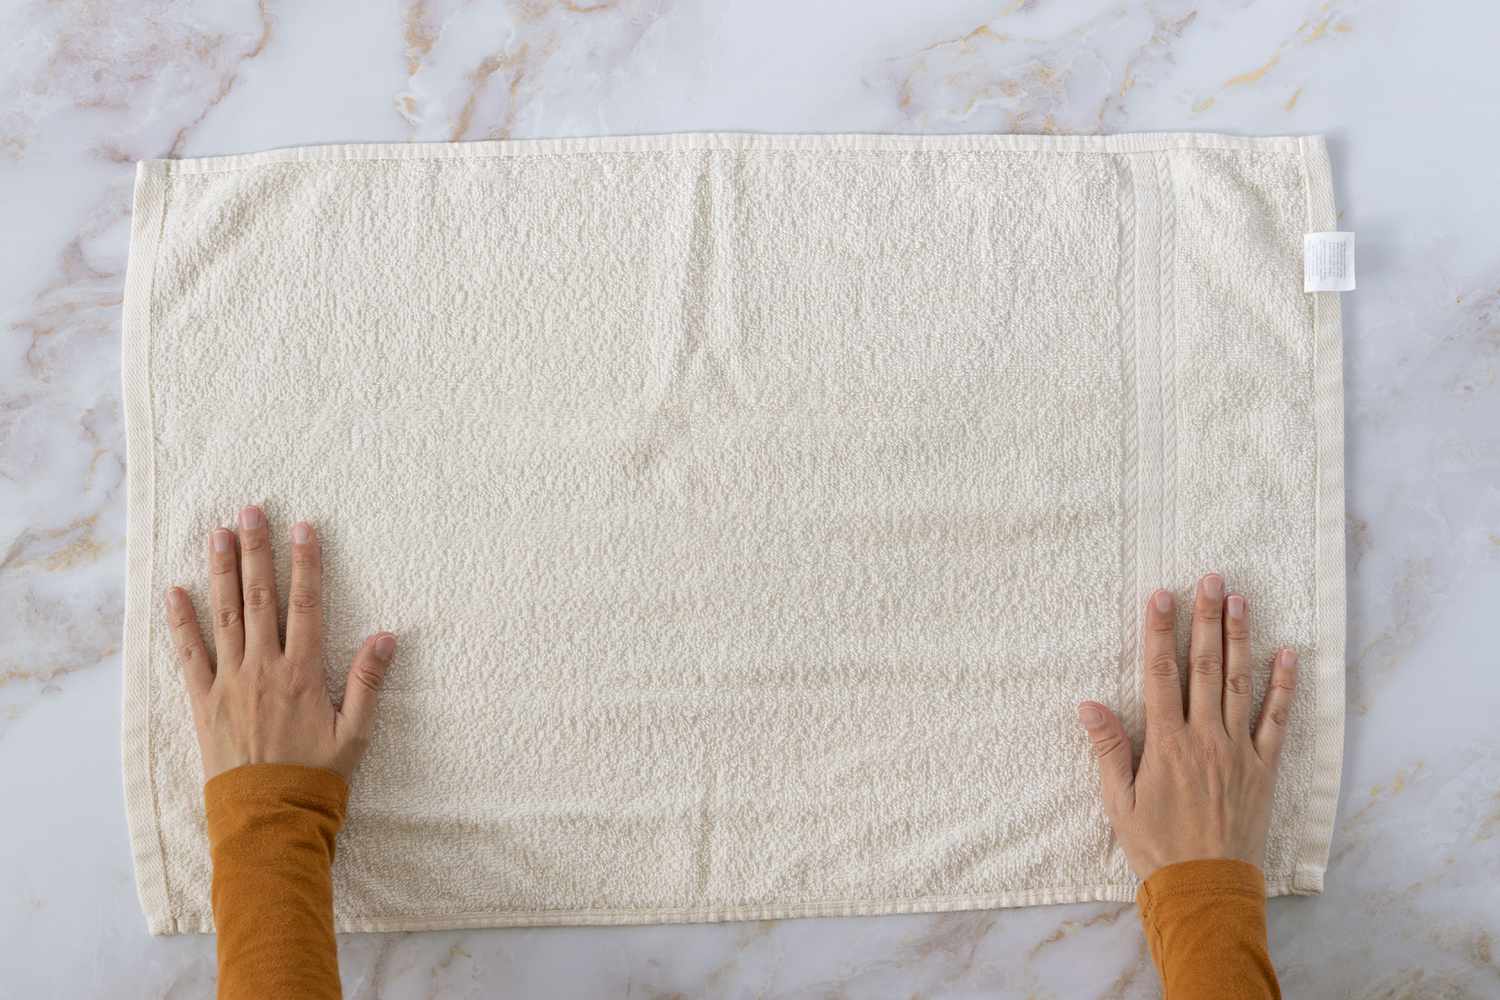 Large cream towel laid flat on marbles surface 